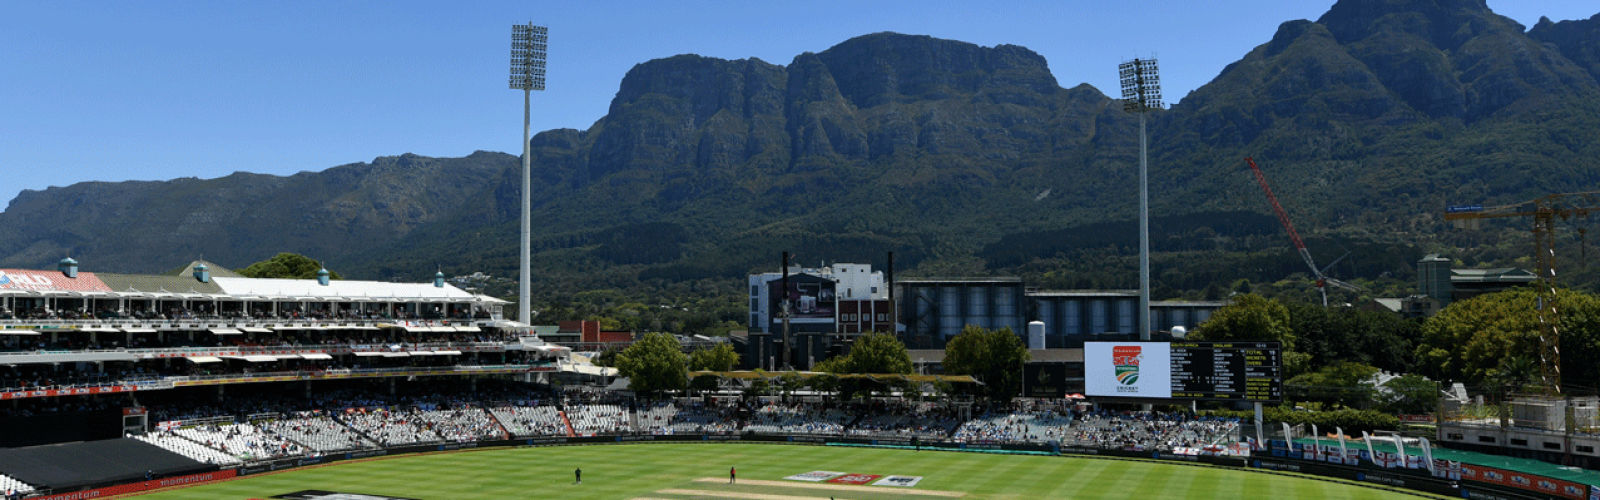 Newlands Cricket Ground in Cape Town is a South African cricket ground.